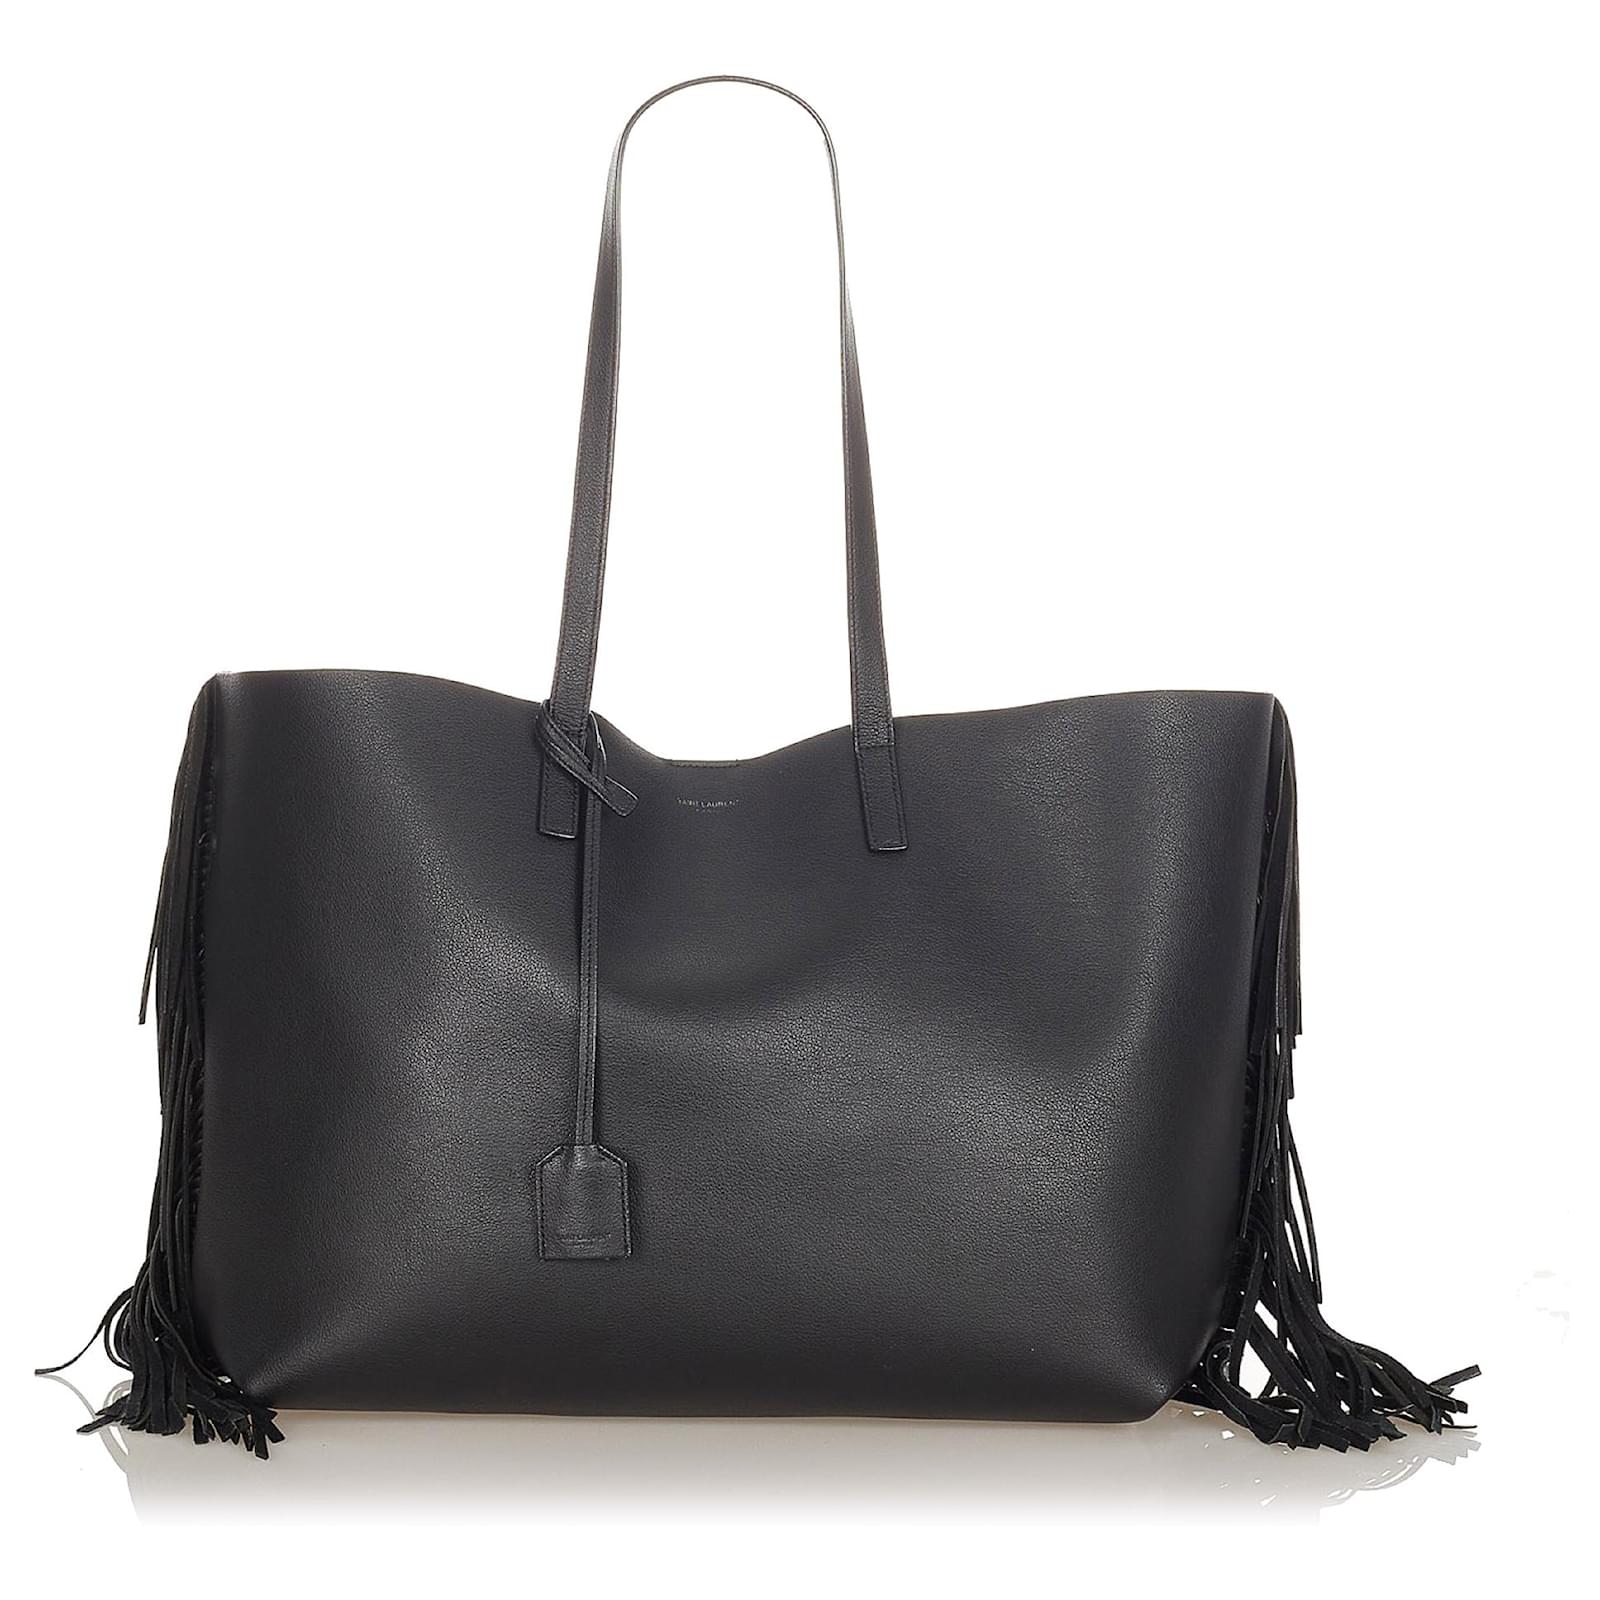 Yves Saint Laurent YSL Black EastWest Leather Tote Bag Pony-style ...